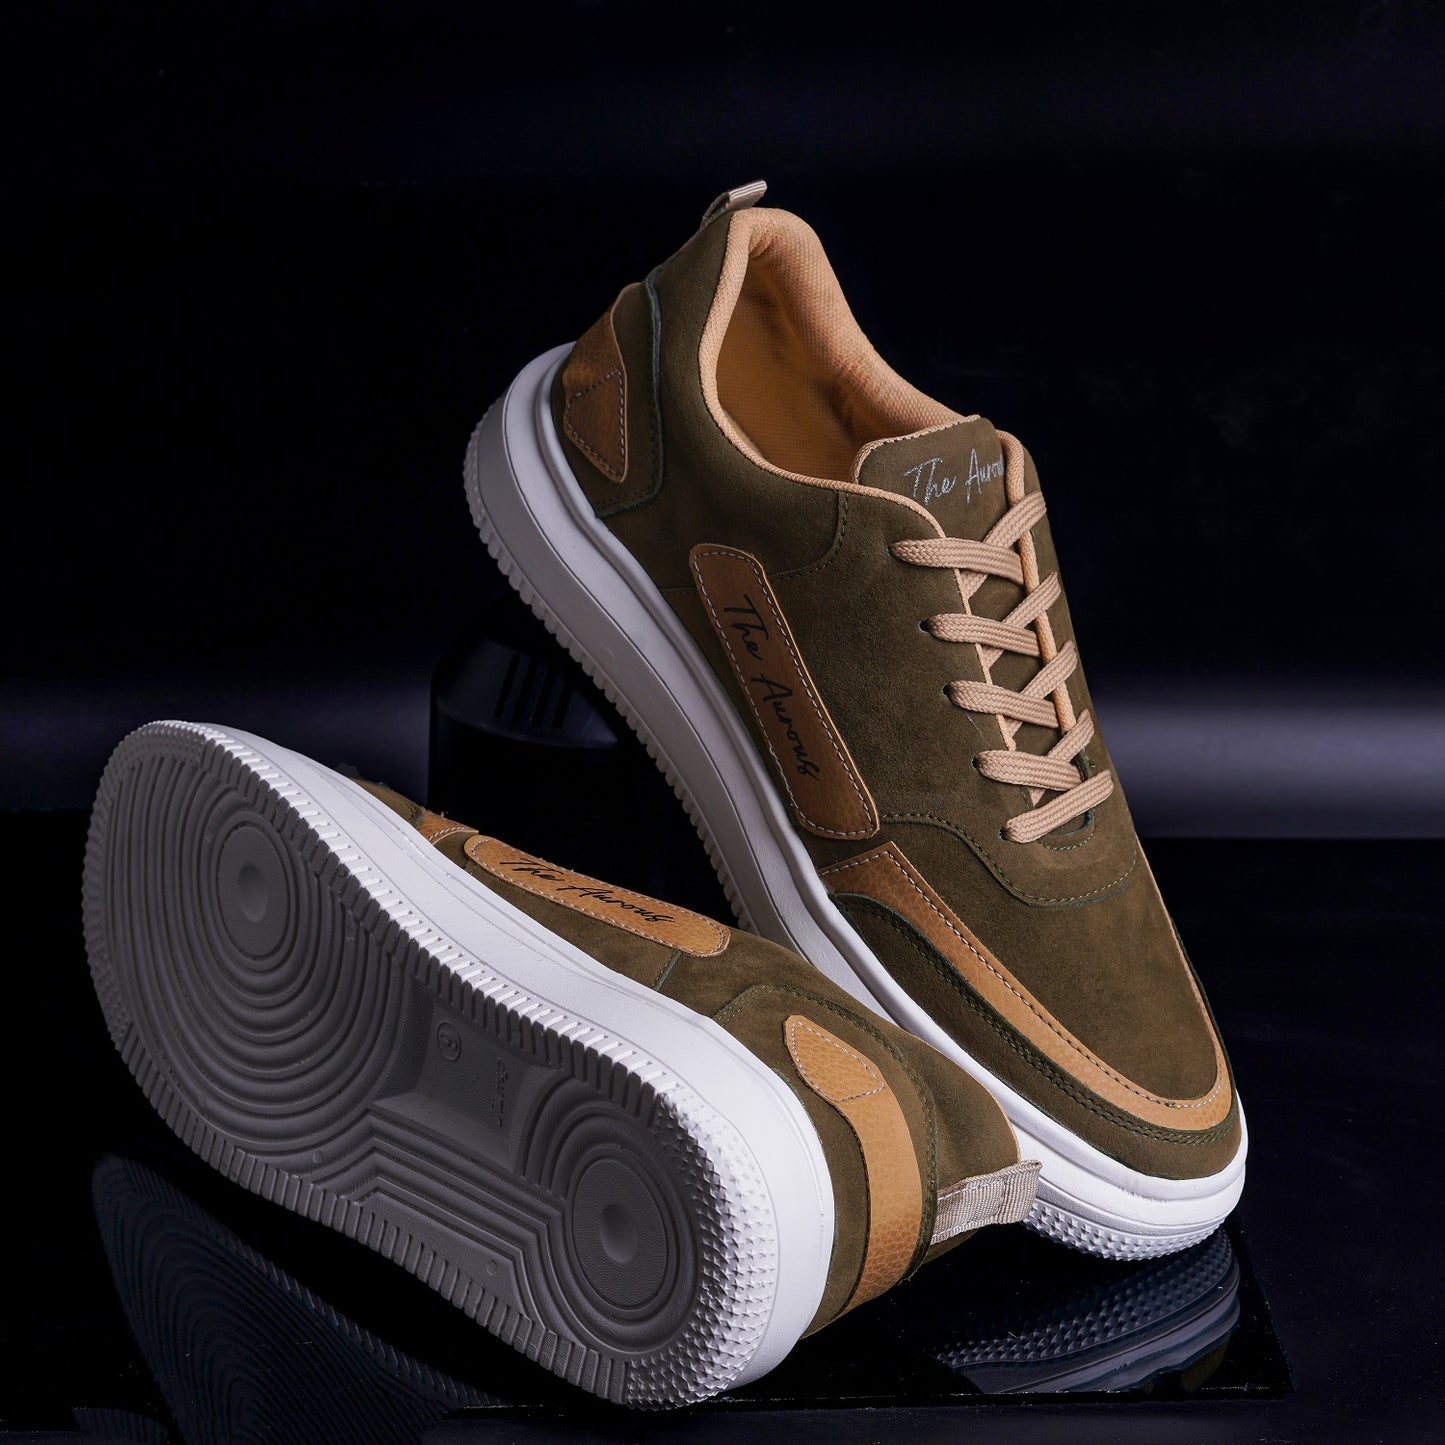 The Aurous Windstorm Olive Green Laceup Sneakers